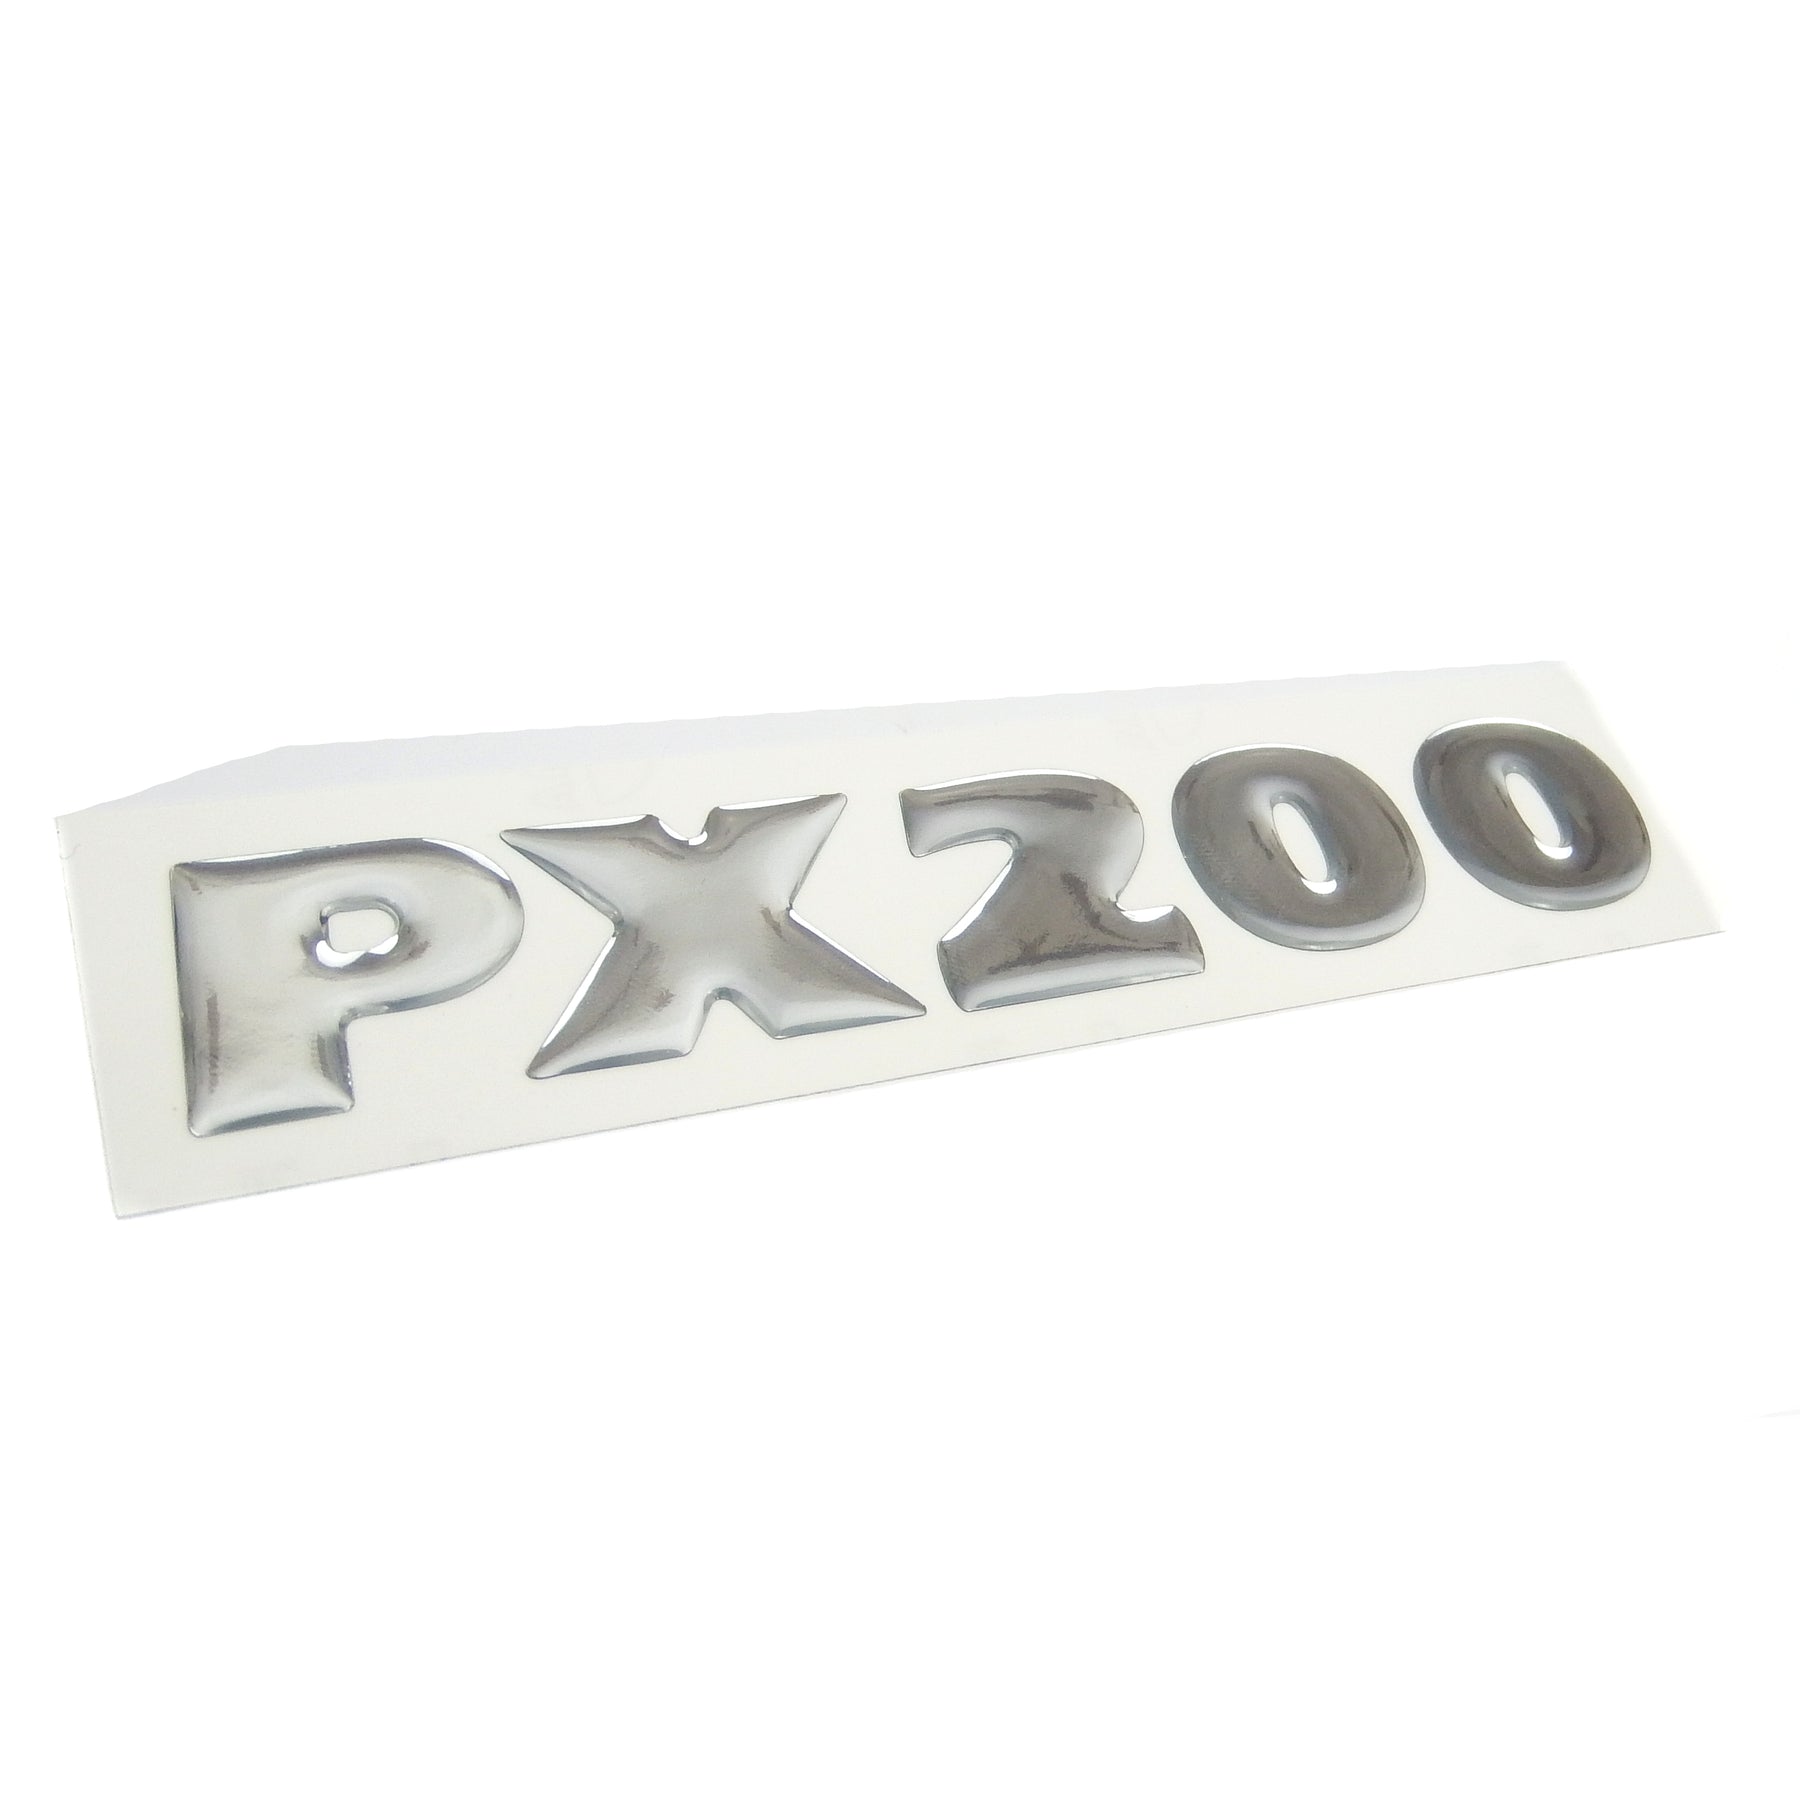 Vespa PX 200 Side Panel Resin Badge (New PX 2001- Style)